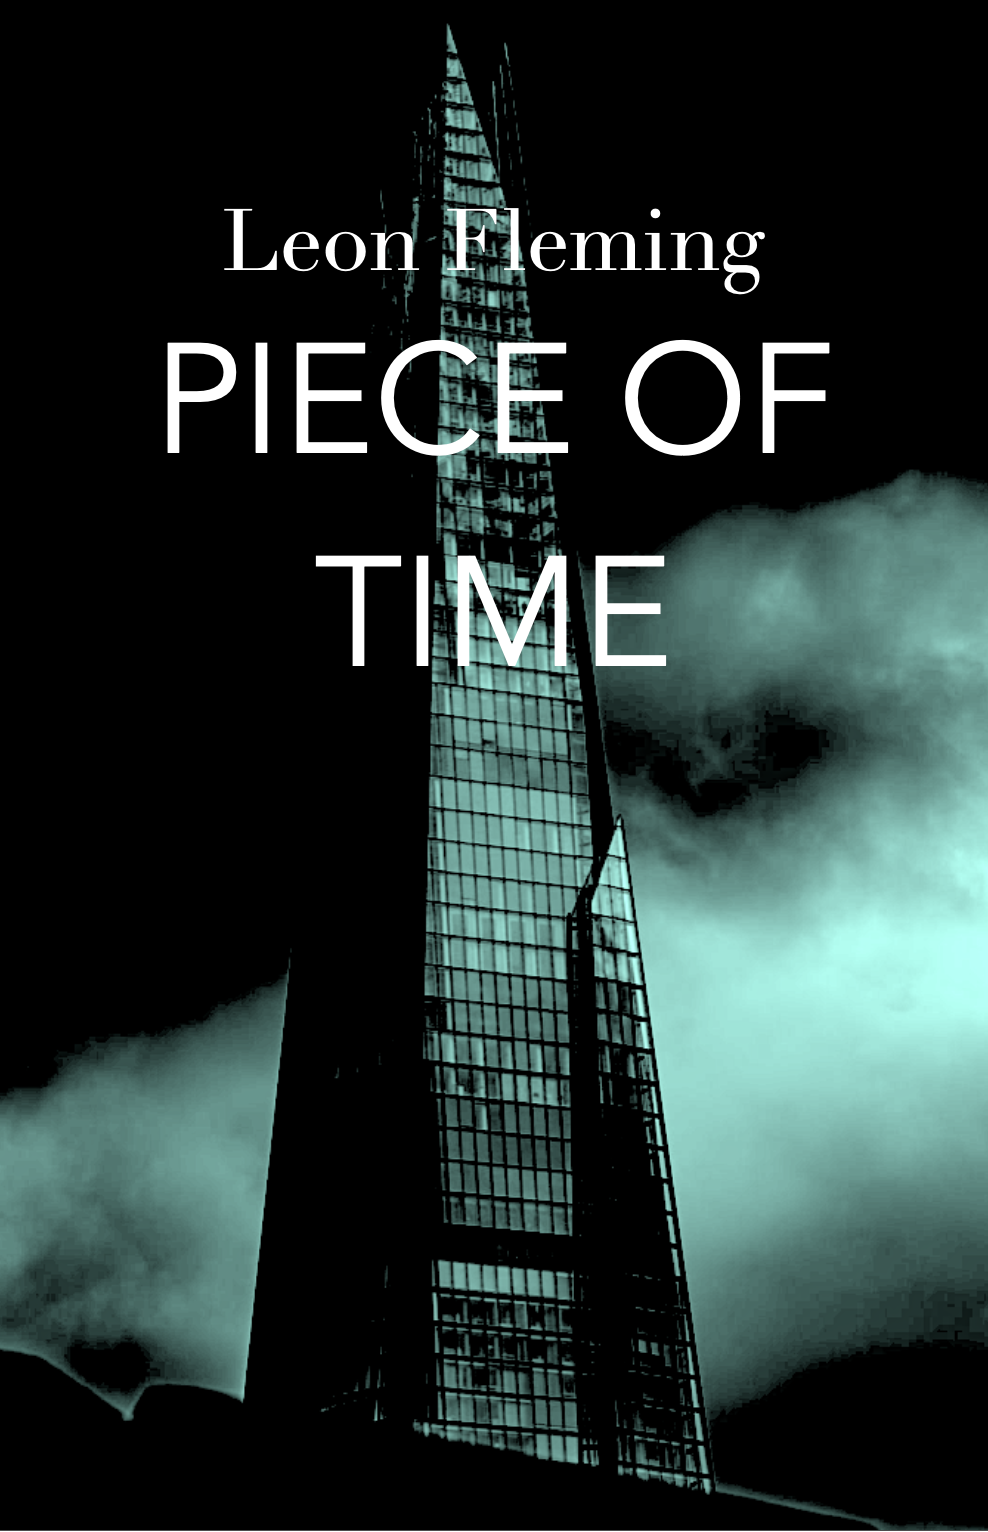 A prototype cover image.